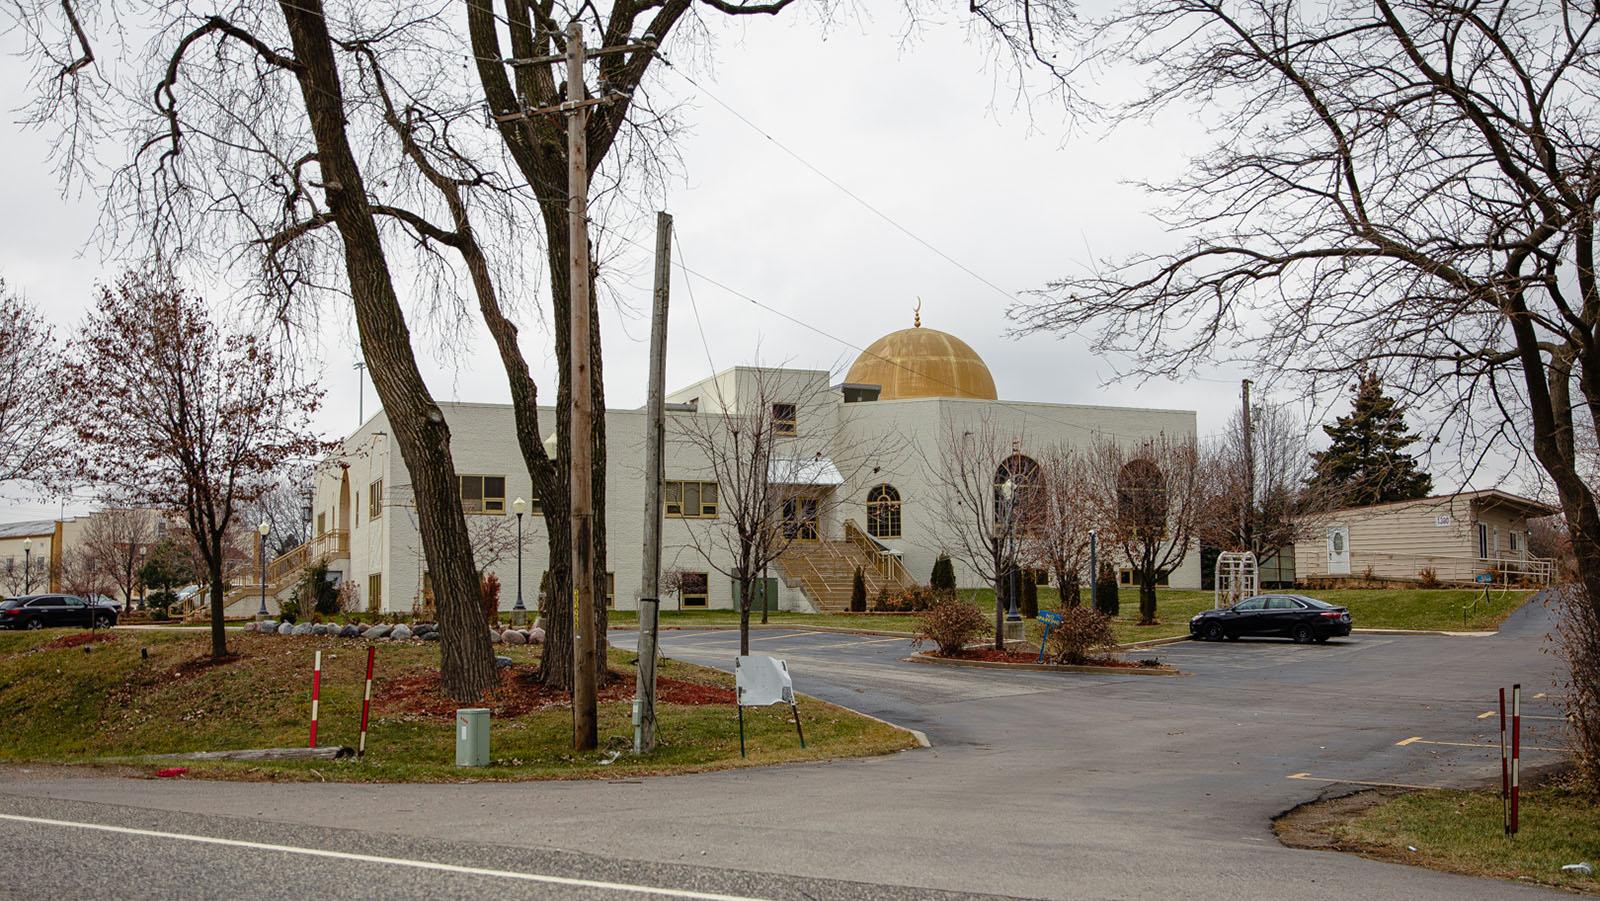 An Institute of the Islamic Education building in Elgin is pictured, with the home occupied by Mohammad Saleem to the right. (Michael Izquierdo / WTTW News)